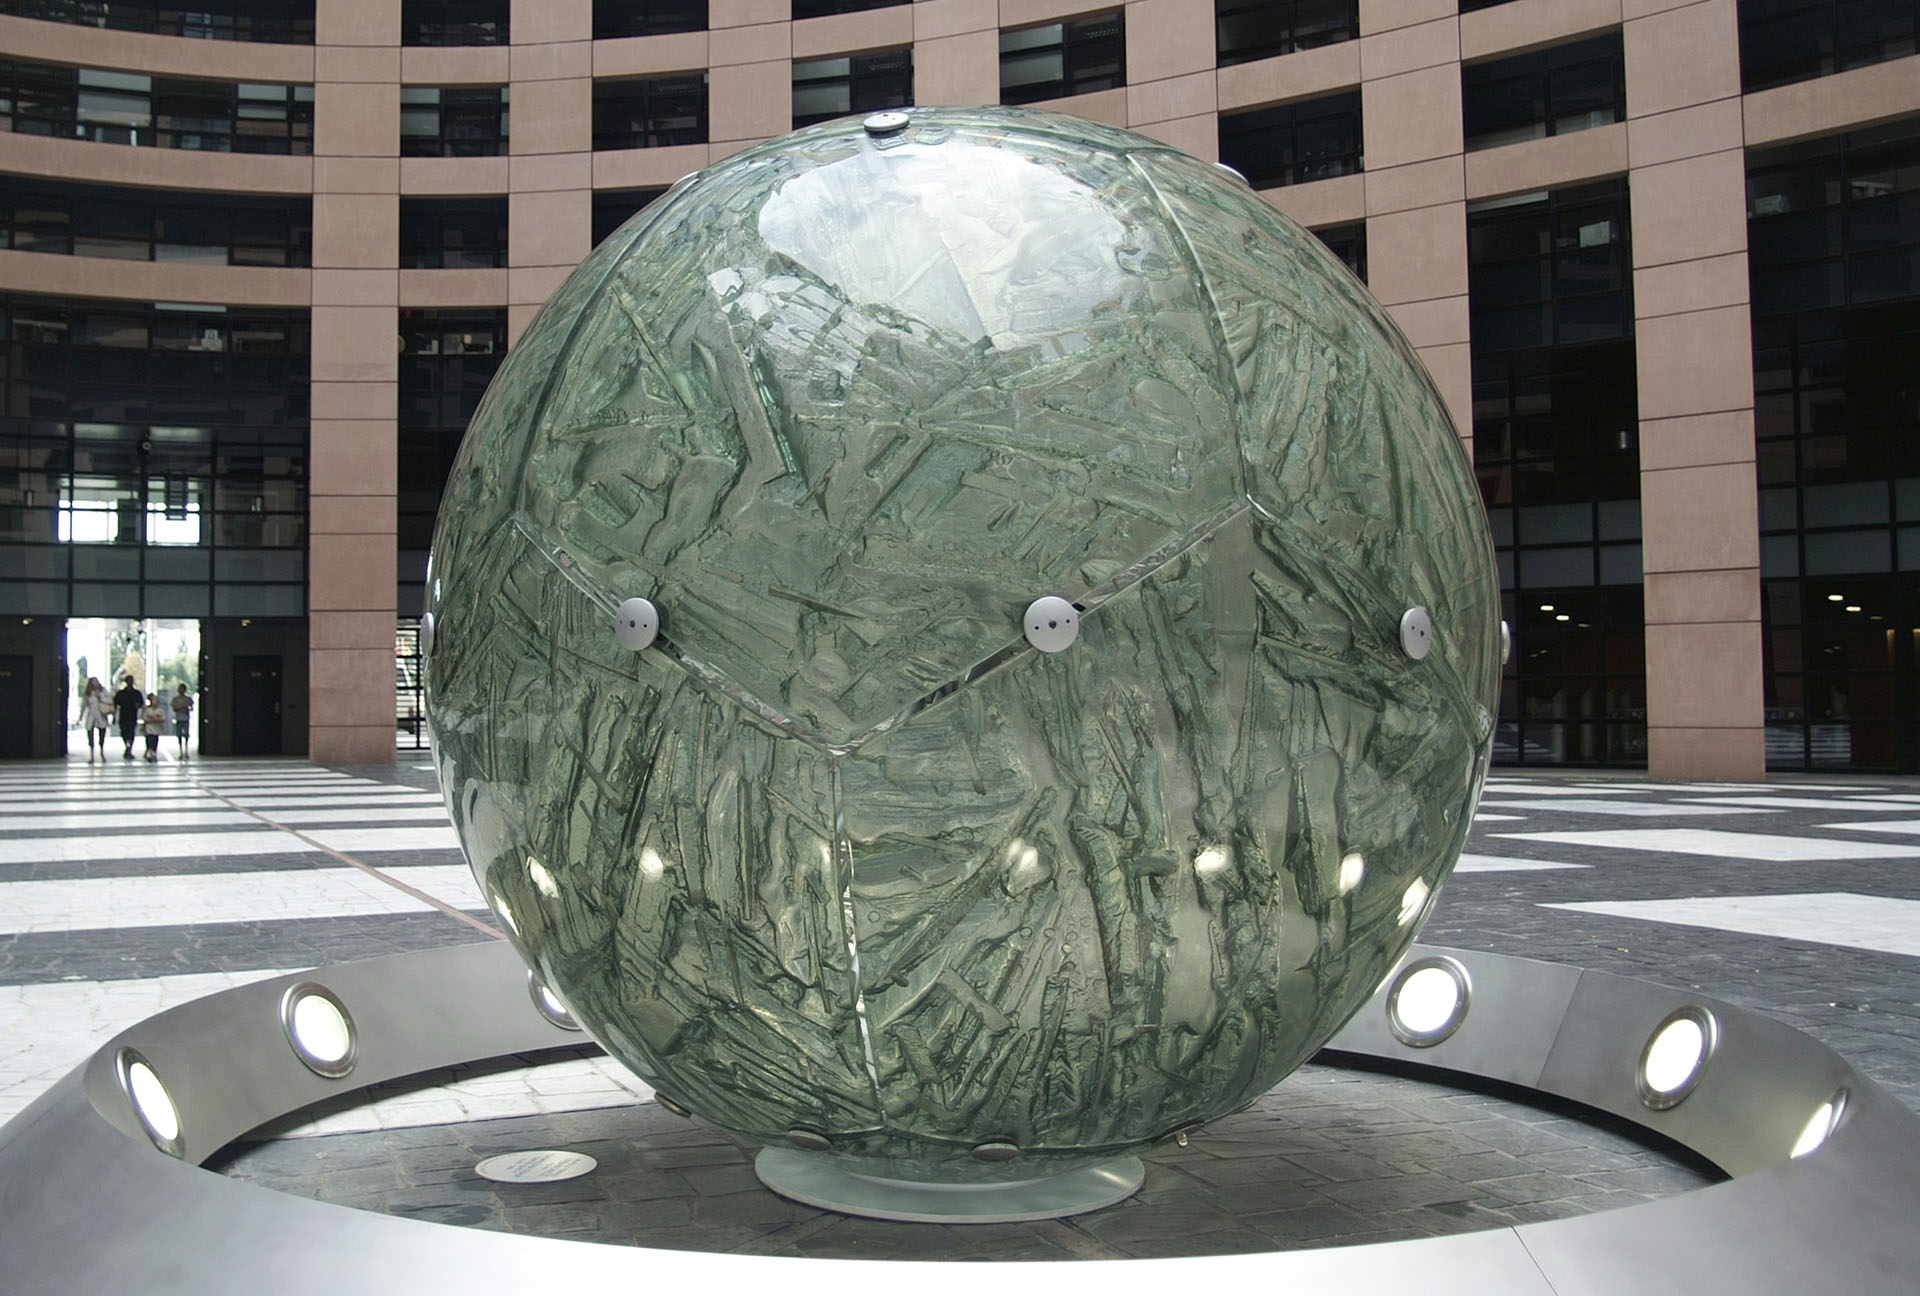 Glass Sphere “The United Earth” in the European Parliament Building